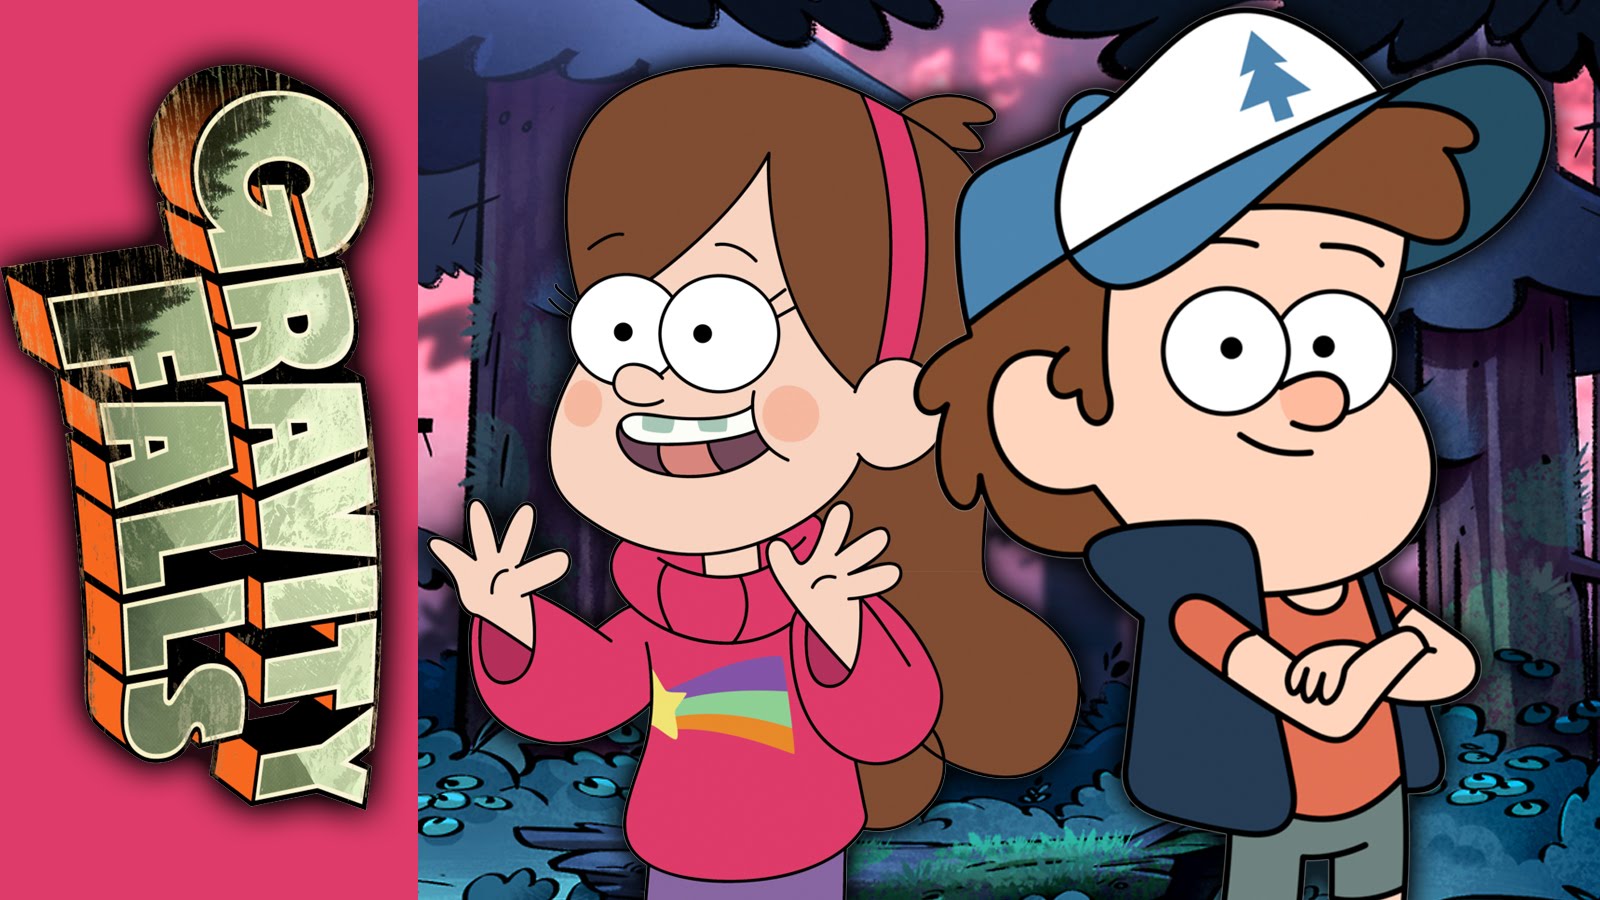 Gravity Falls Season 3: Release Date Announcement 2021 and More Updates